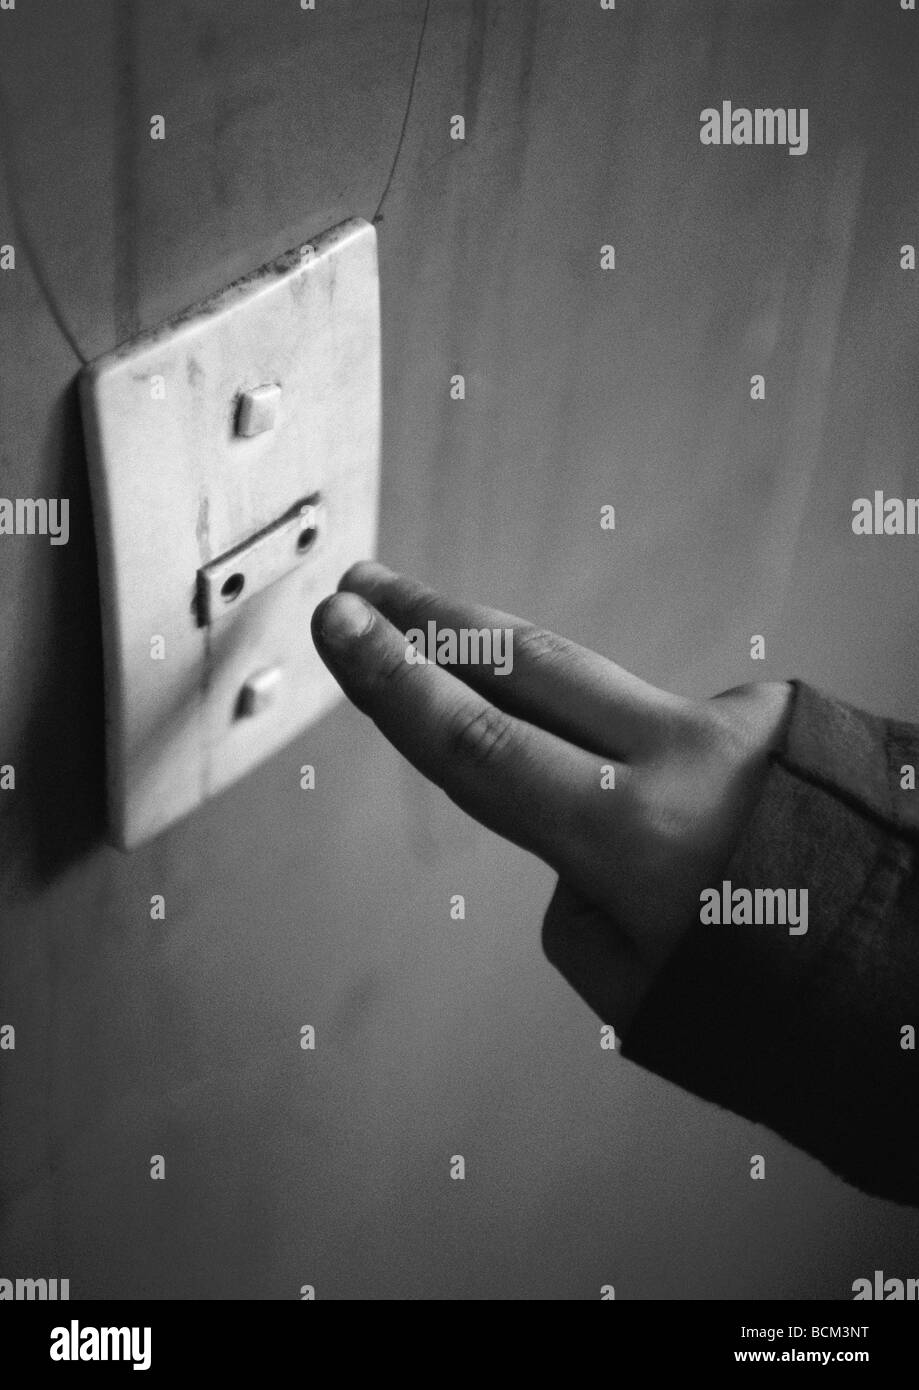 Child reaching for electric outlet Stock Photo